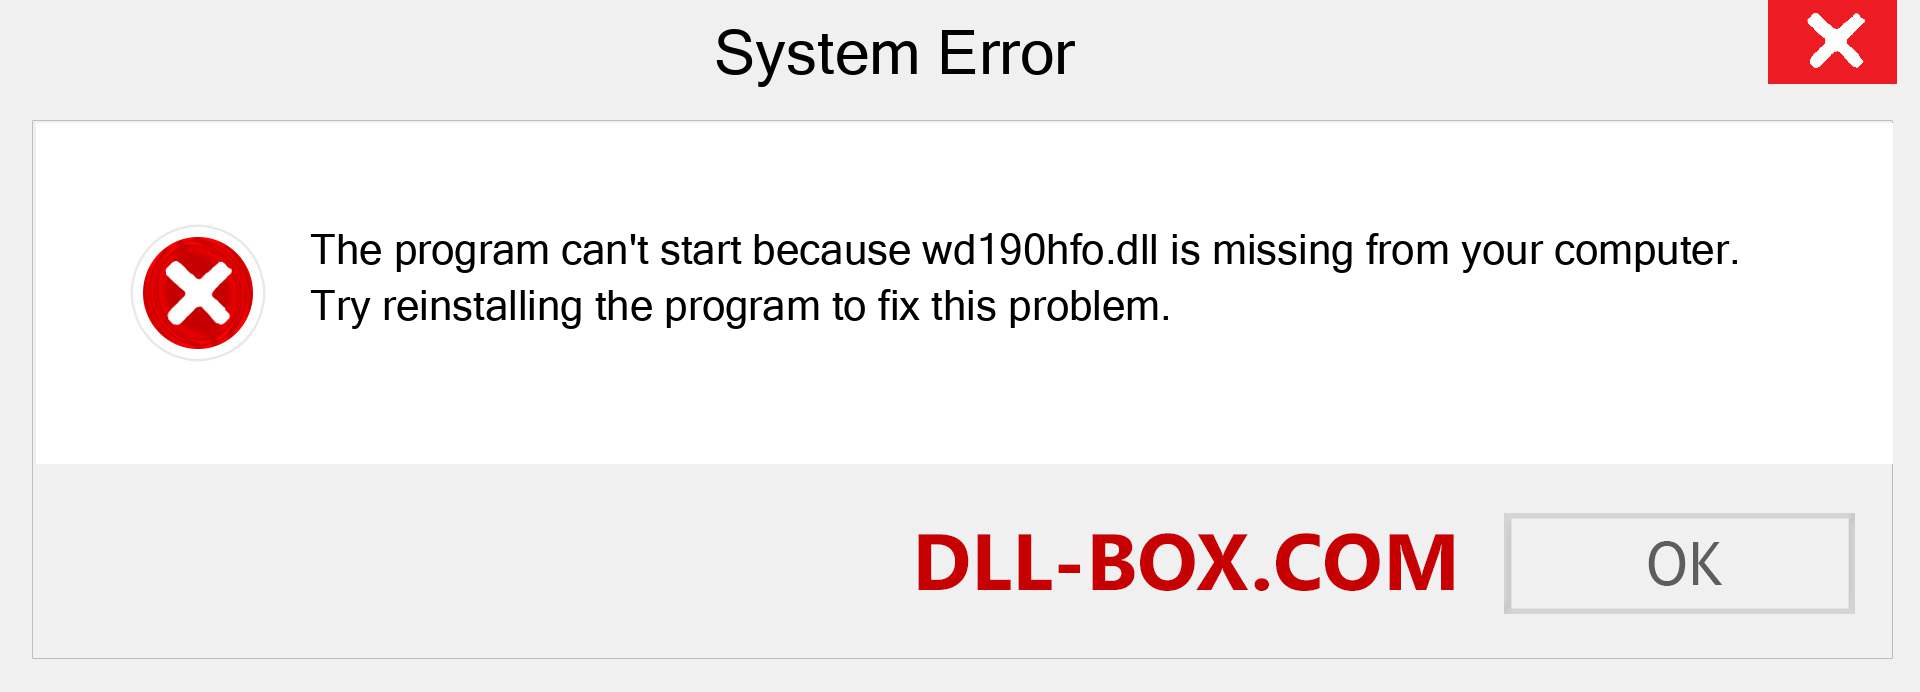  wd190hfo.dll file is missing?. Download for Windows 7, 8, 10 - Fix  wd190hfo dll Missing Error on Windows, photos, images